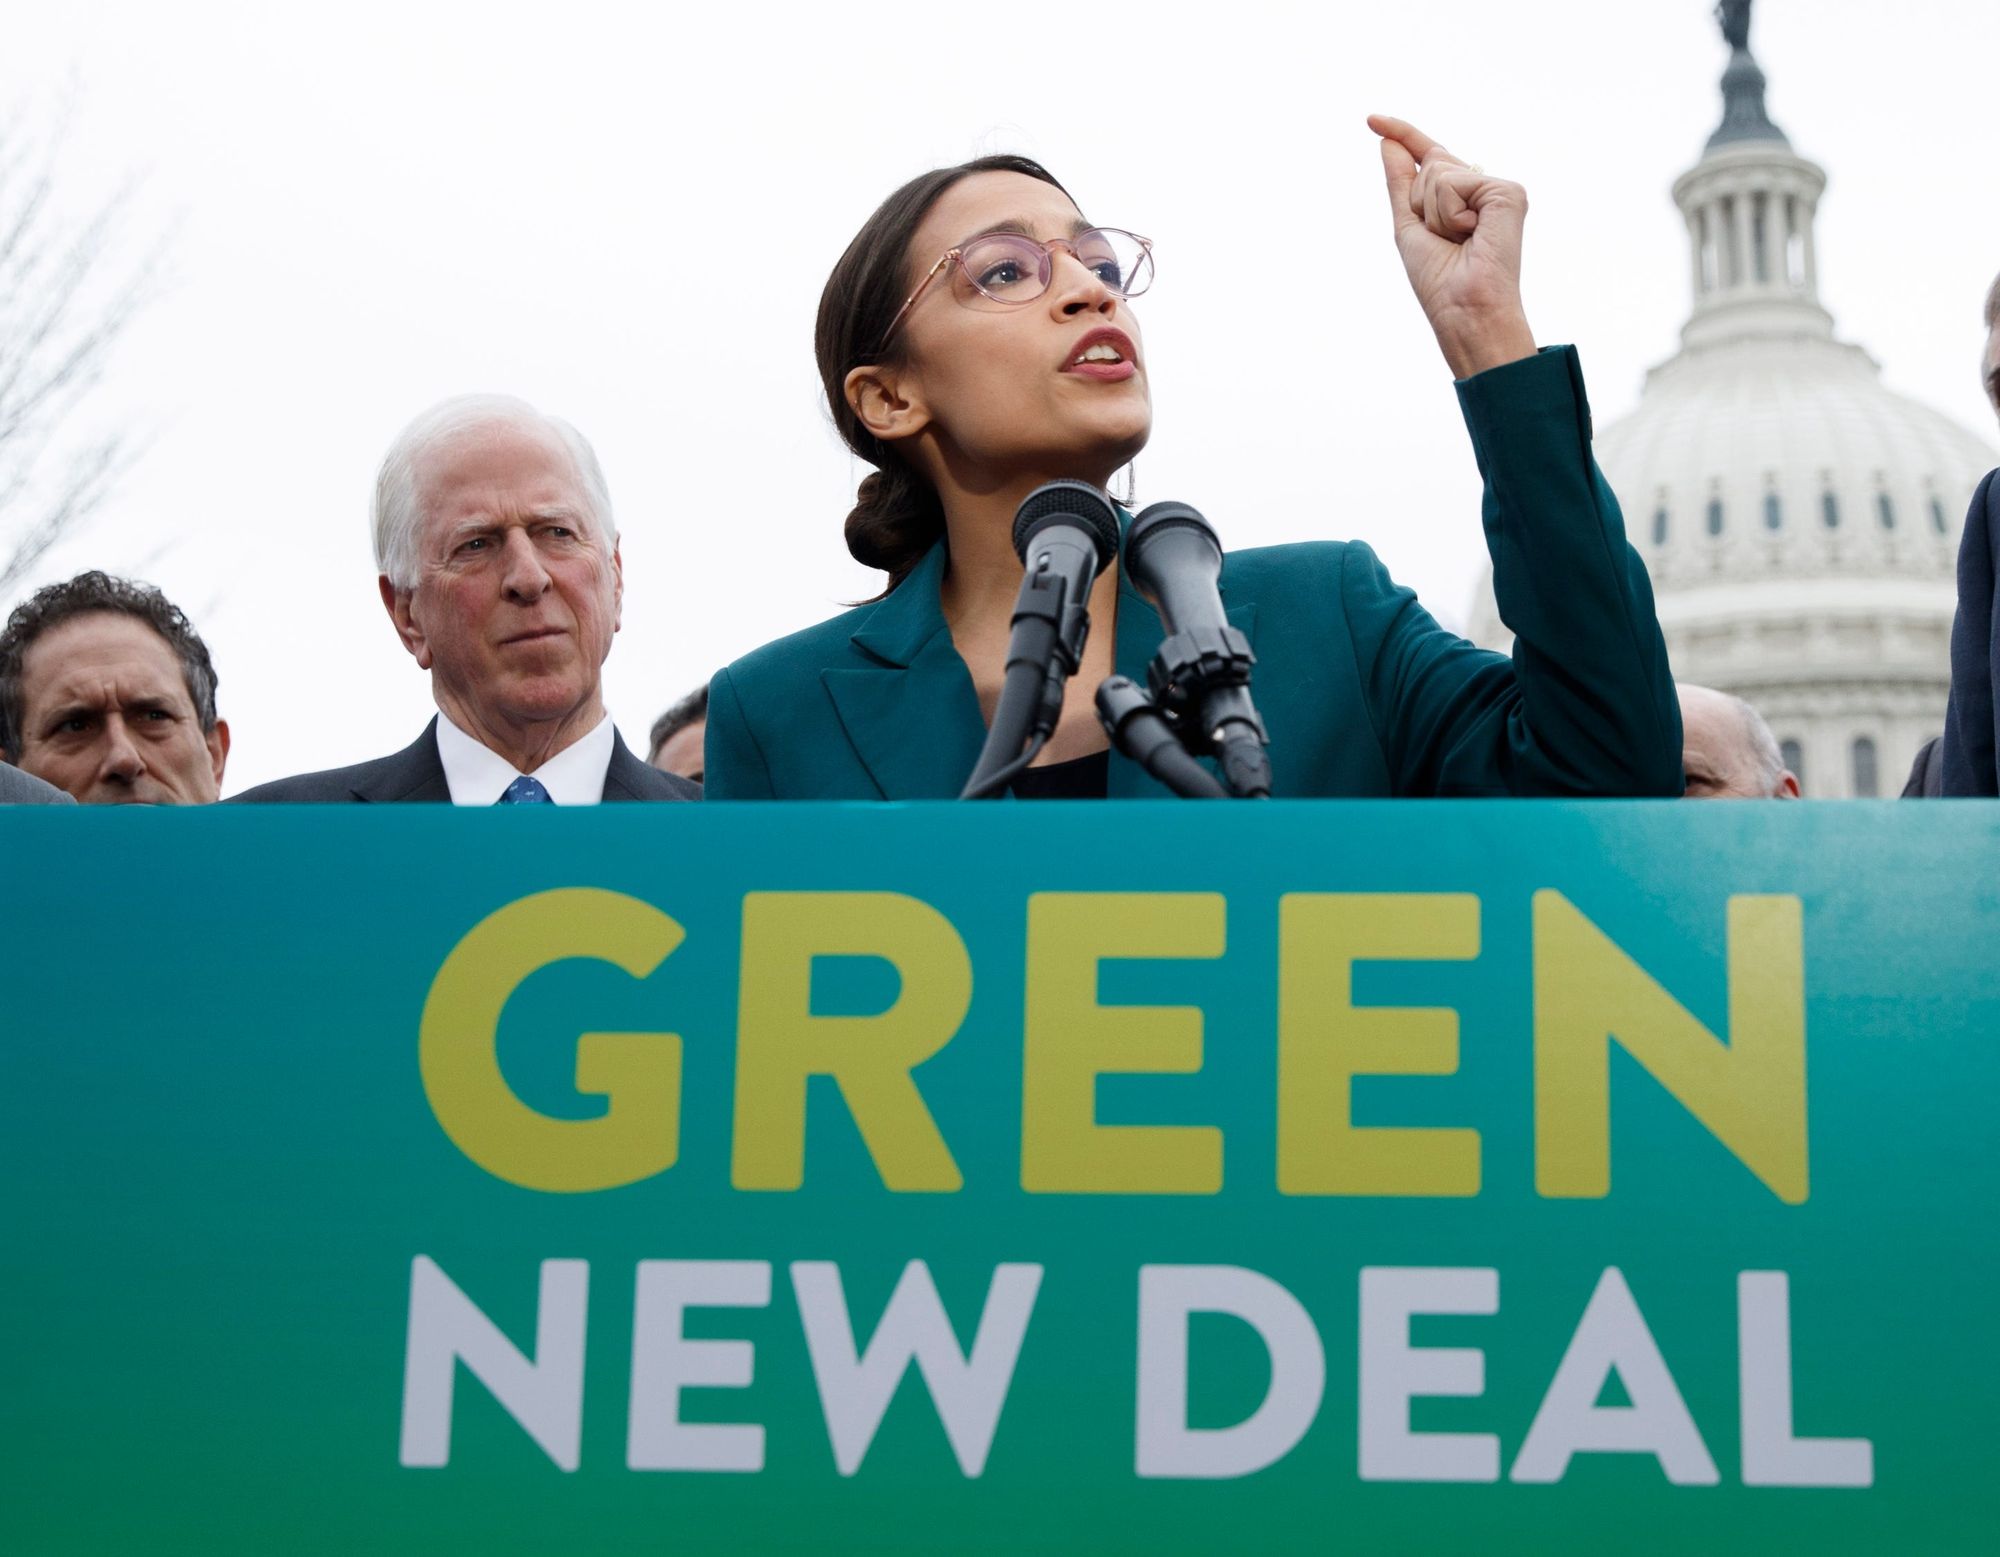 Issue #657: Bitcoin, The Real Green New Deal